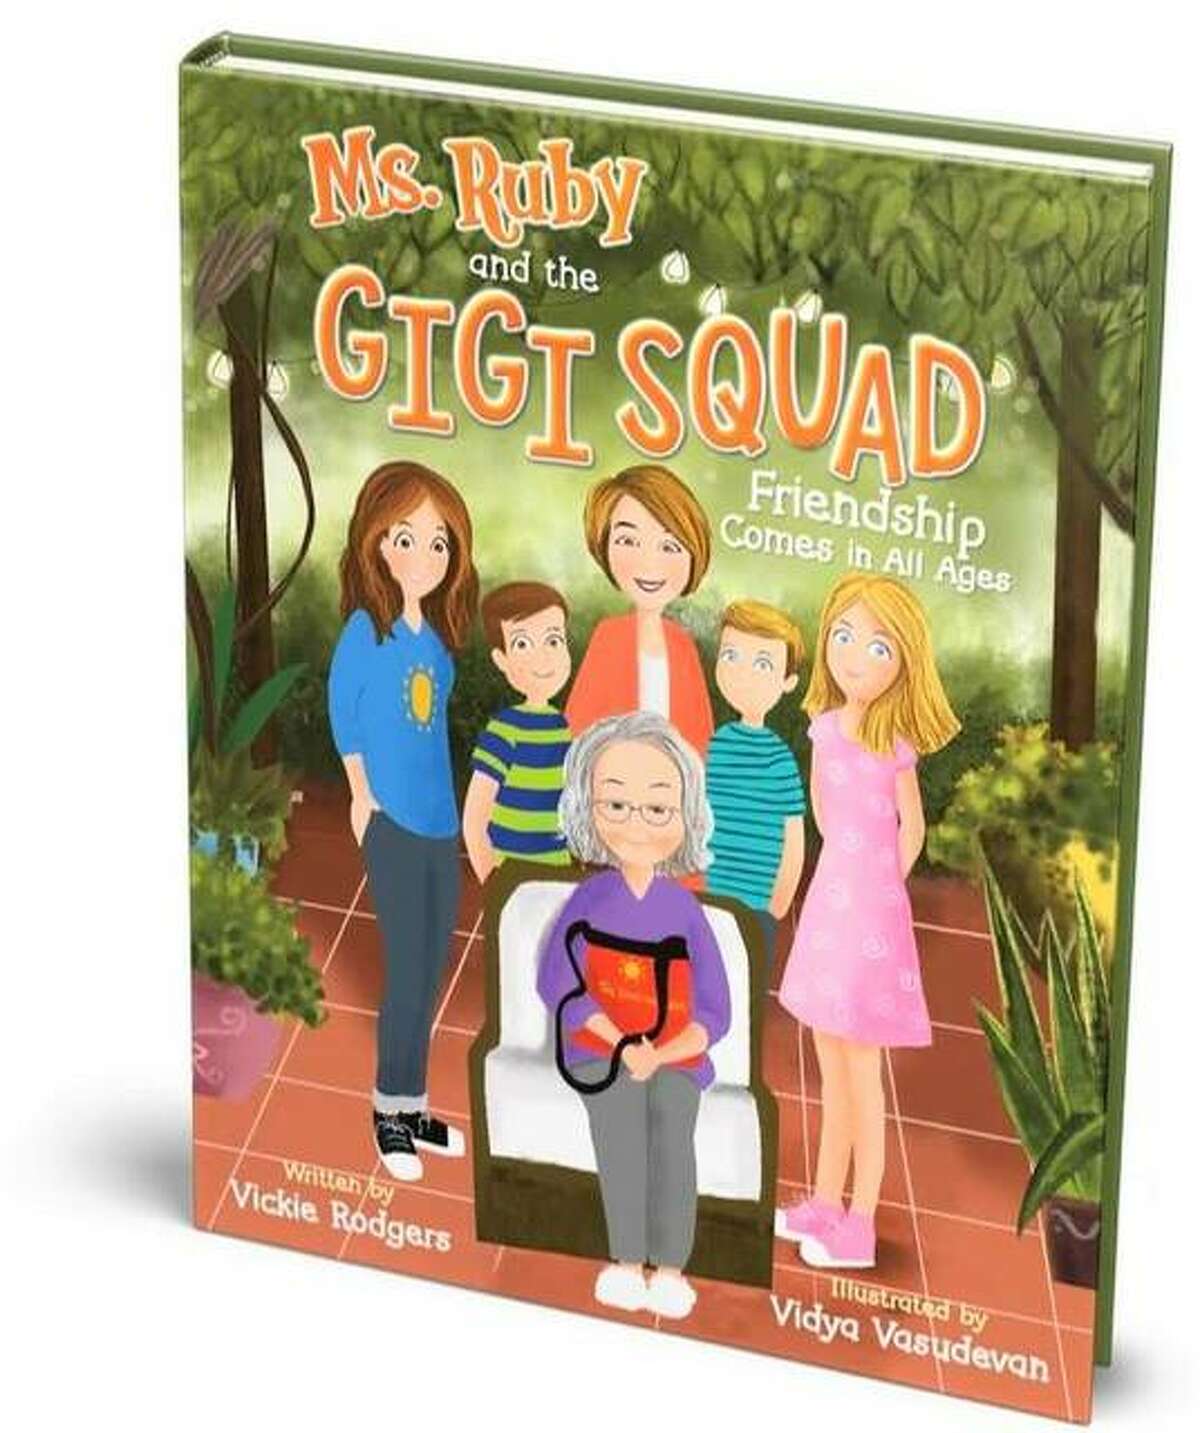 The cover of “Ms. Ruby and the Gigi Squad: Friendships Come in All Ages,” by illustrator Vidya Vasudevan, reproduced from a photograph by Linda Snyder. The book is available to pre-order now, at www.vickierodgers.com, with delivery by mid-November, in time for Christmas. Sales launch live on Amazon Nov. 8.